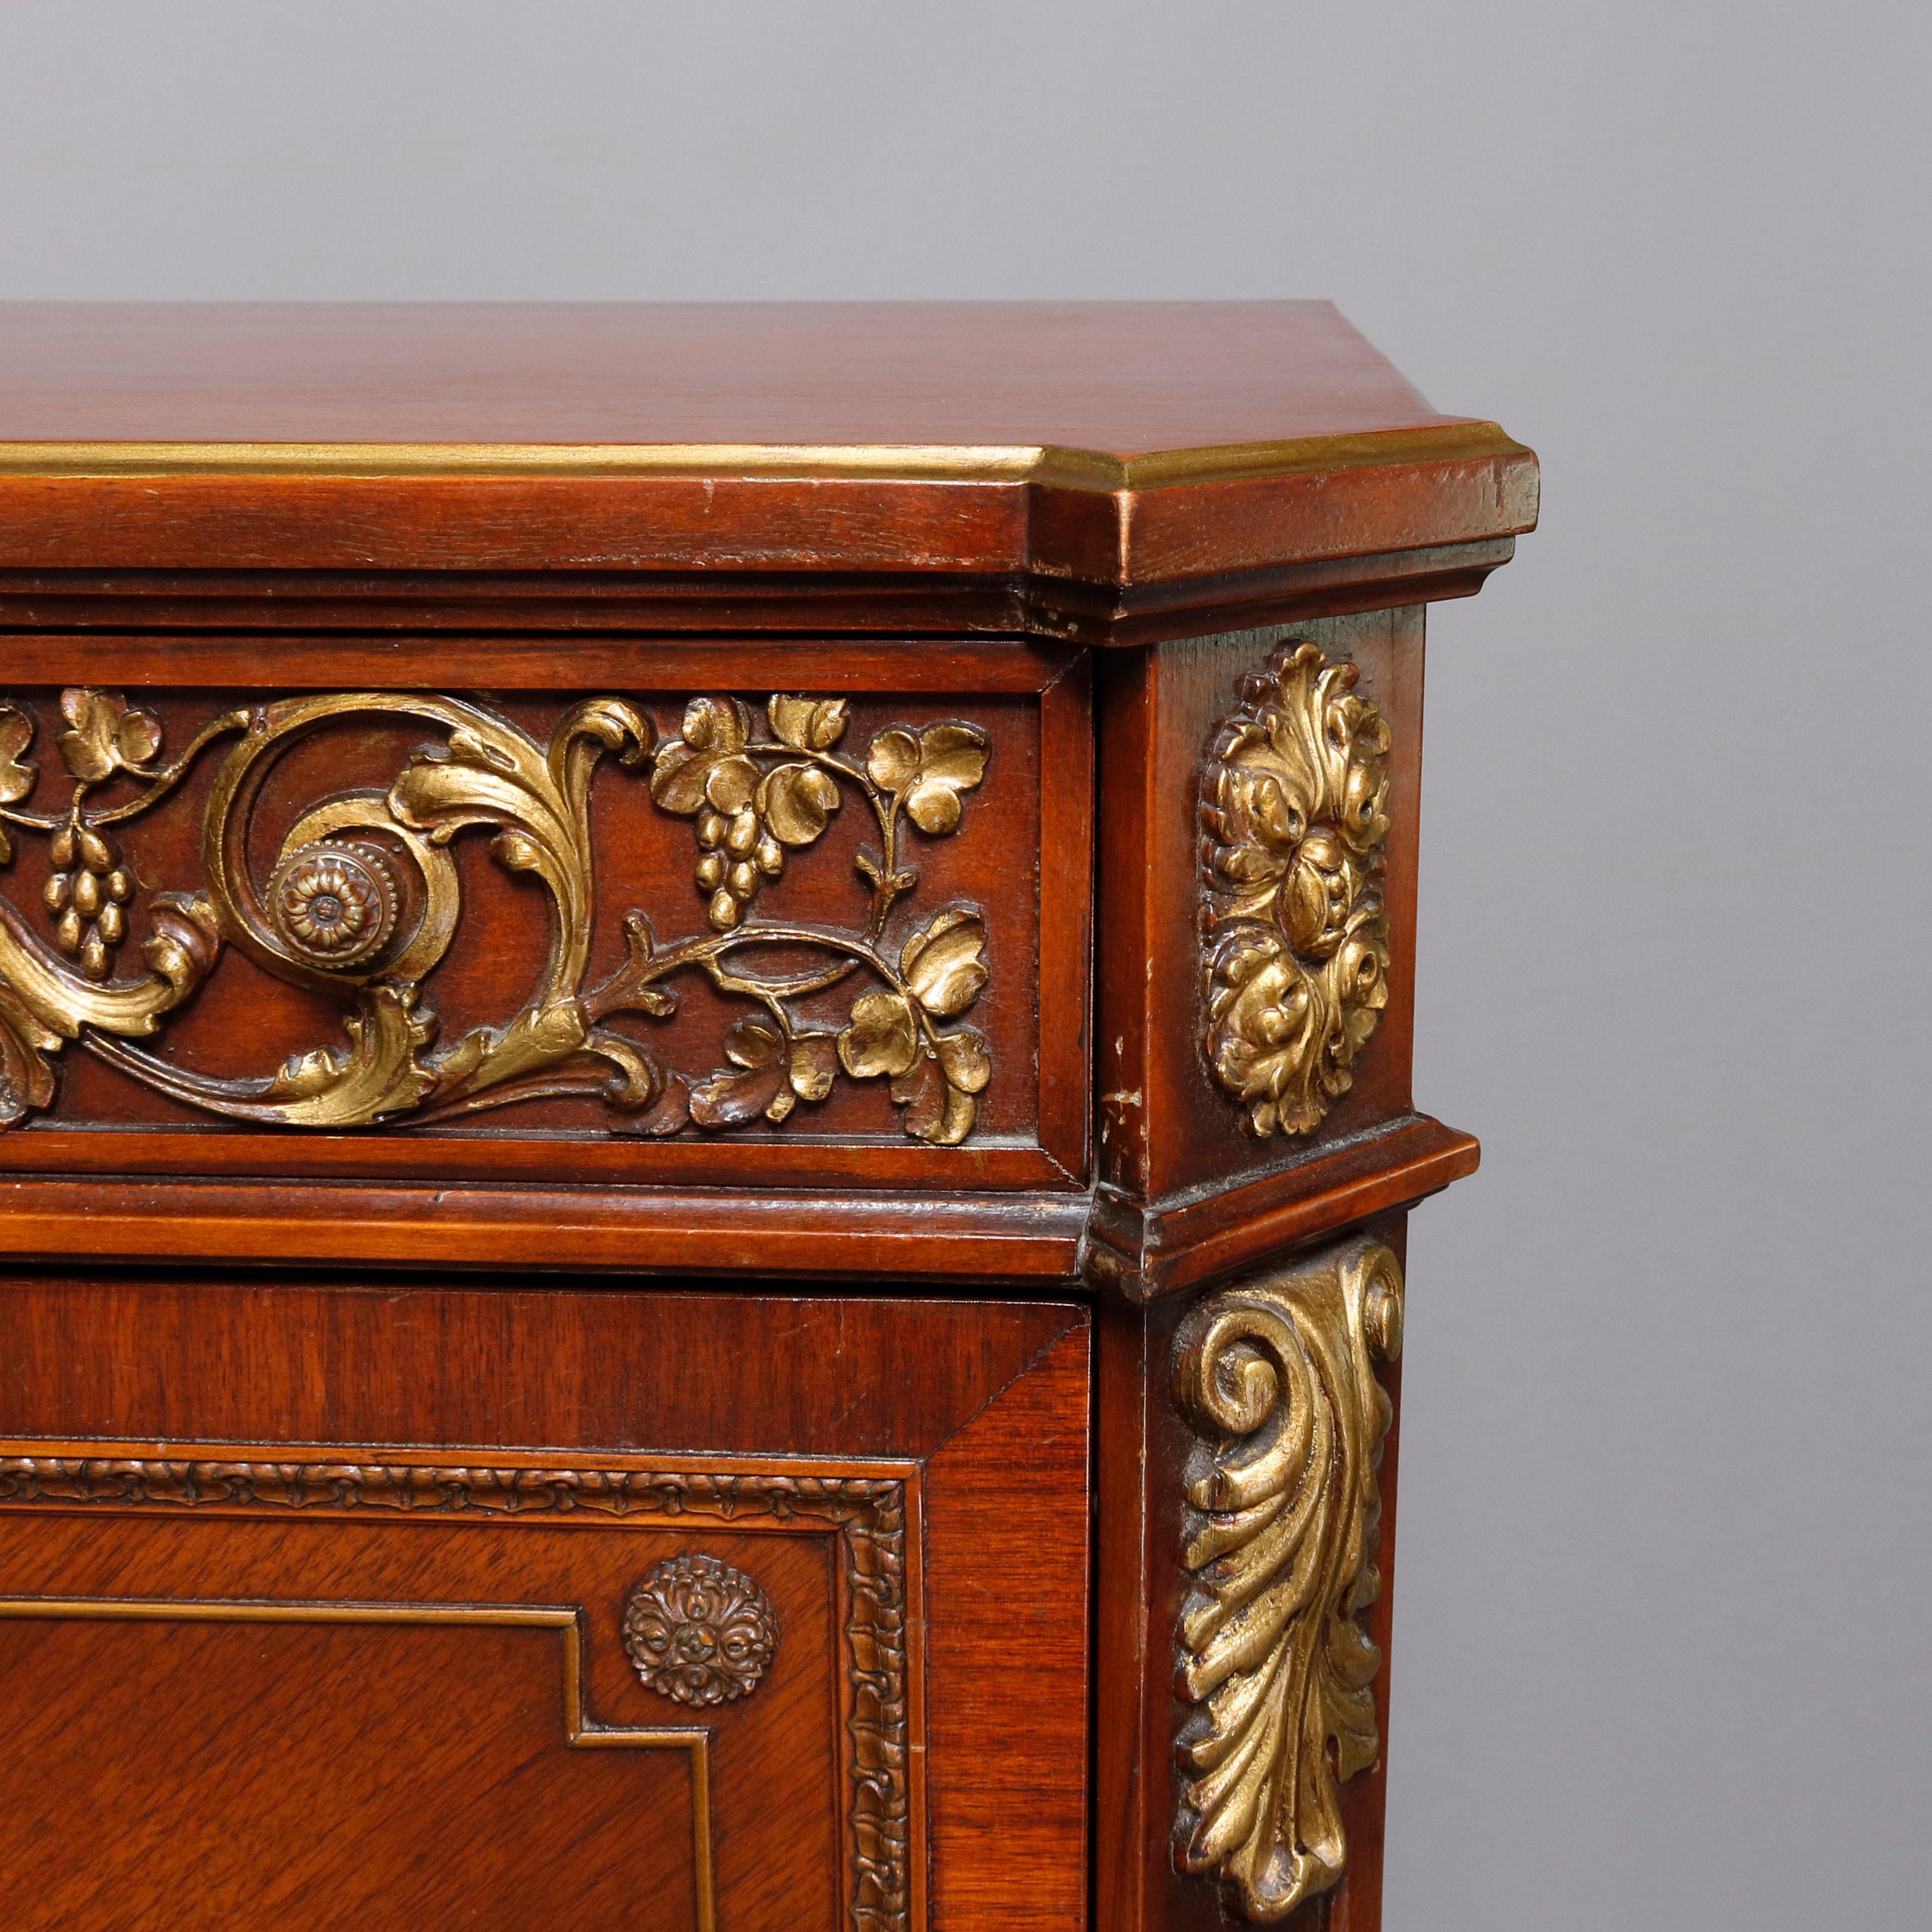 A continental French Louis XV style abattant offers mahogany construction with upper lng drawer having cast bronze scroll and foliate mounts over drop front secretary desk having bookmatched veneering with central hand painted Victory decoration